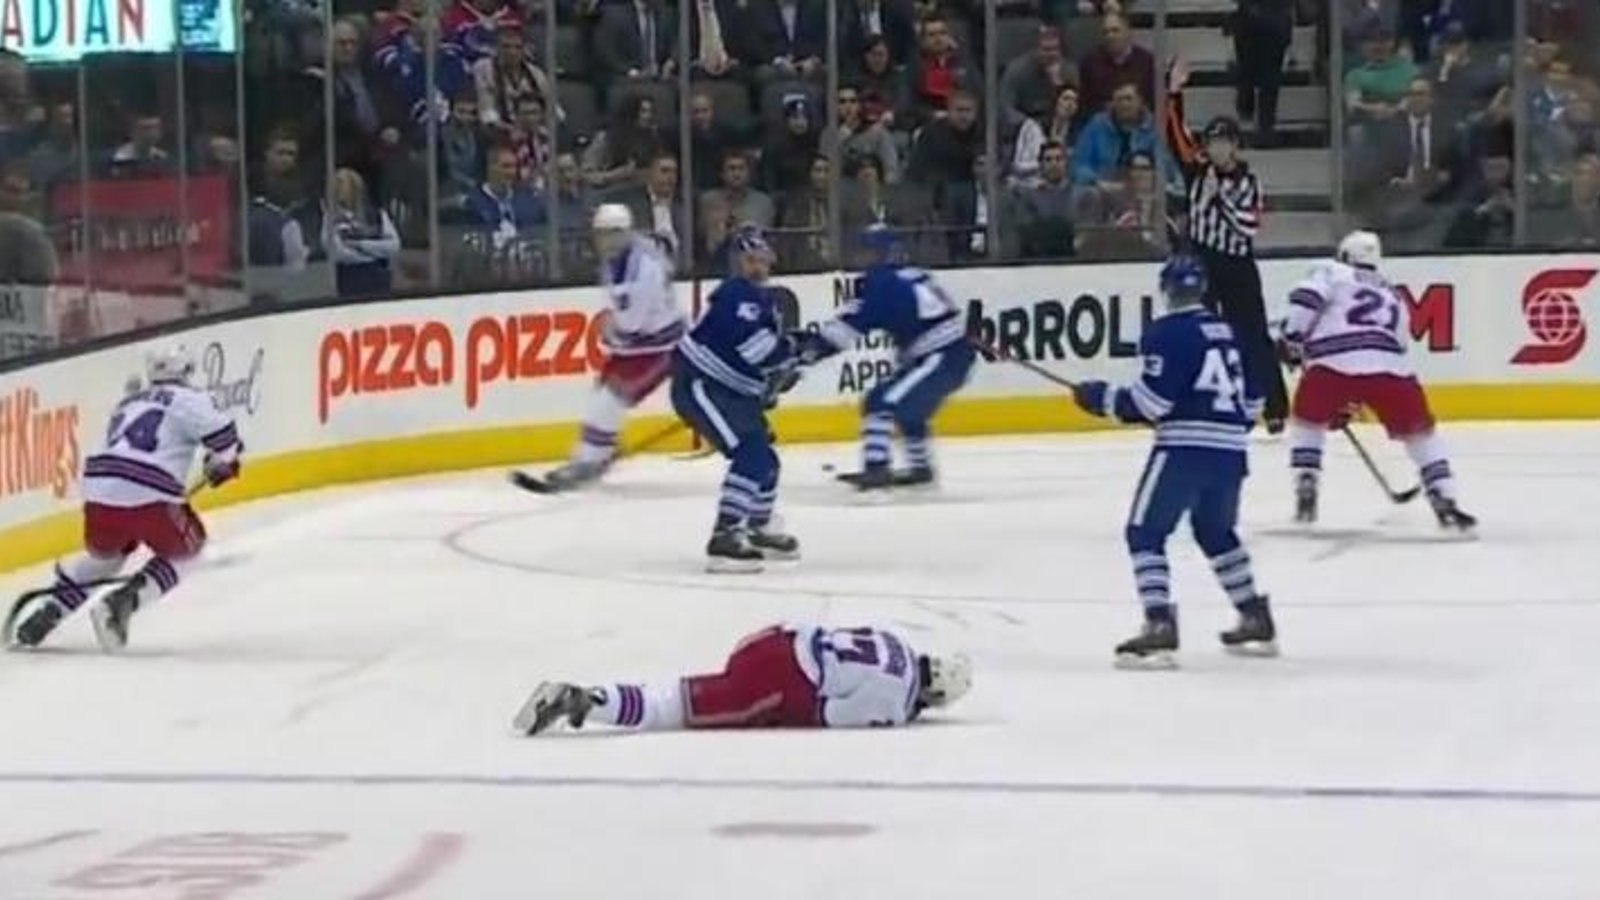 Brutal head shot takes out Mcdonagh in his second game back from concussion.